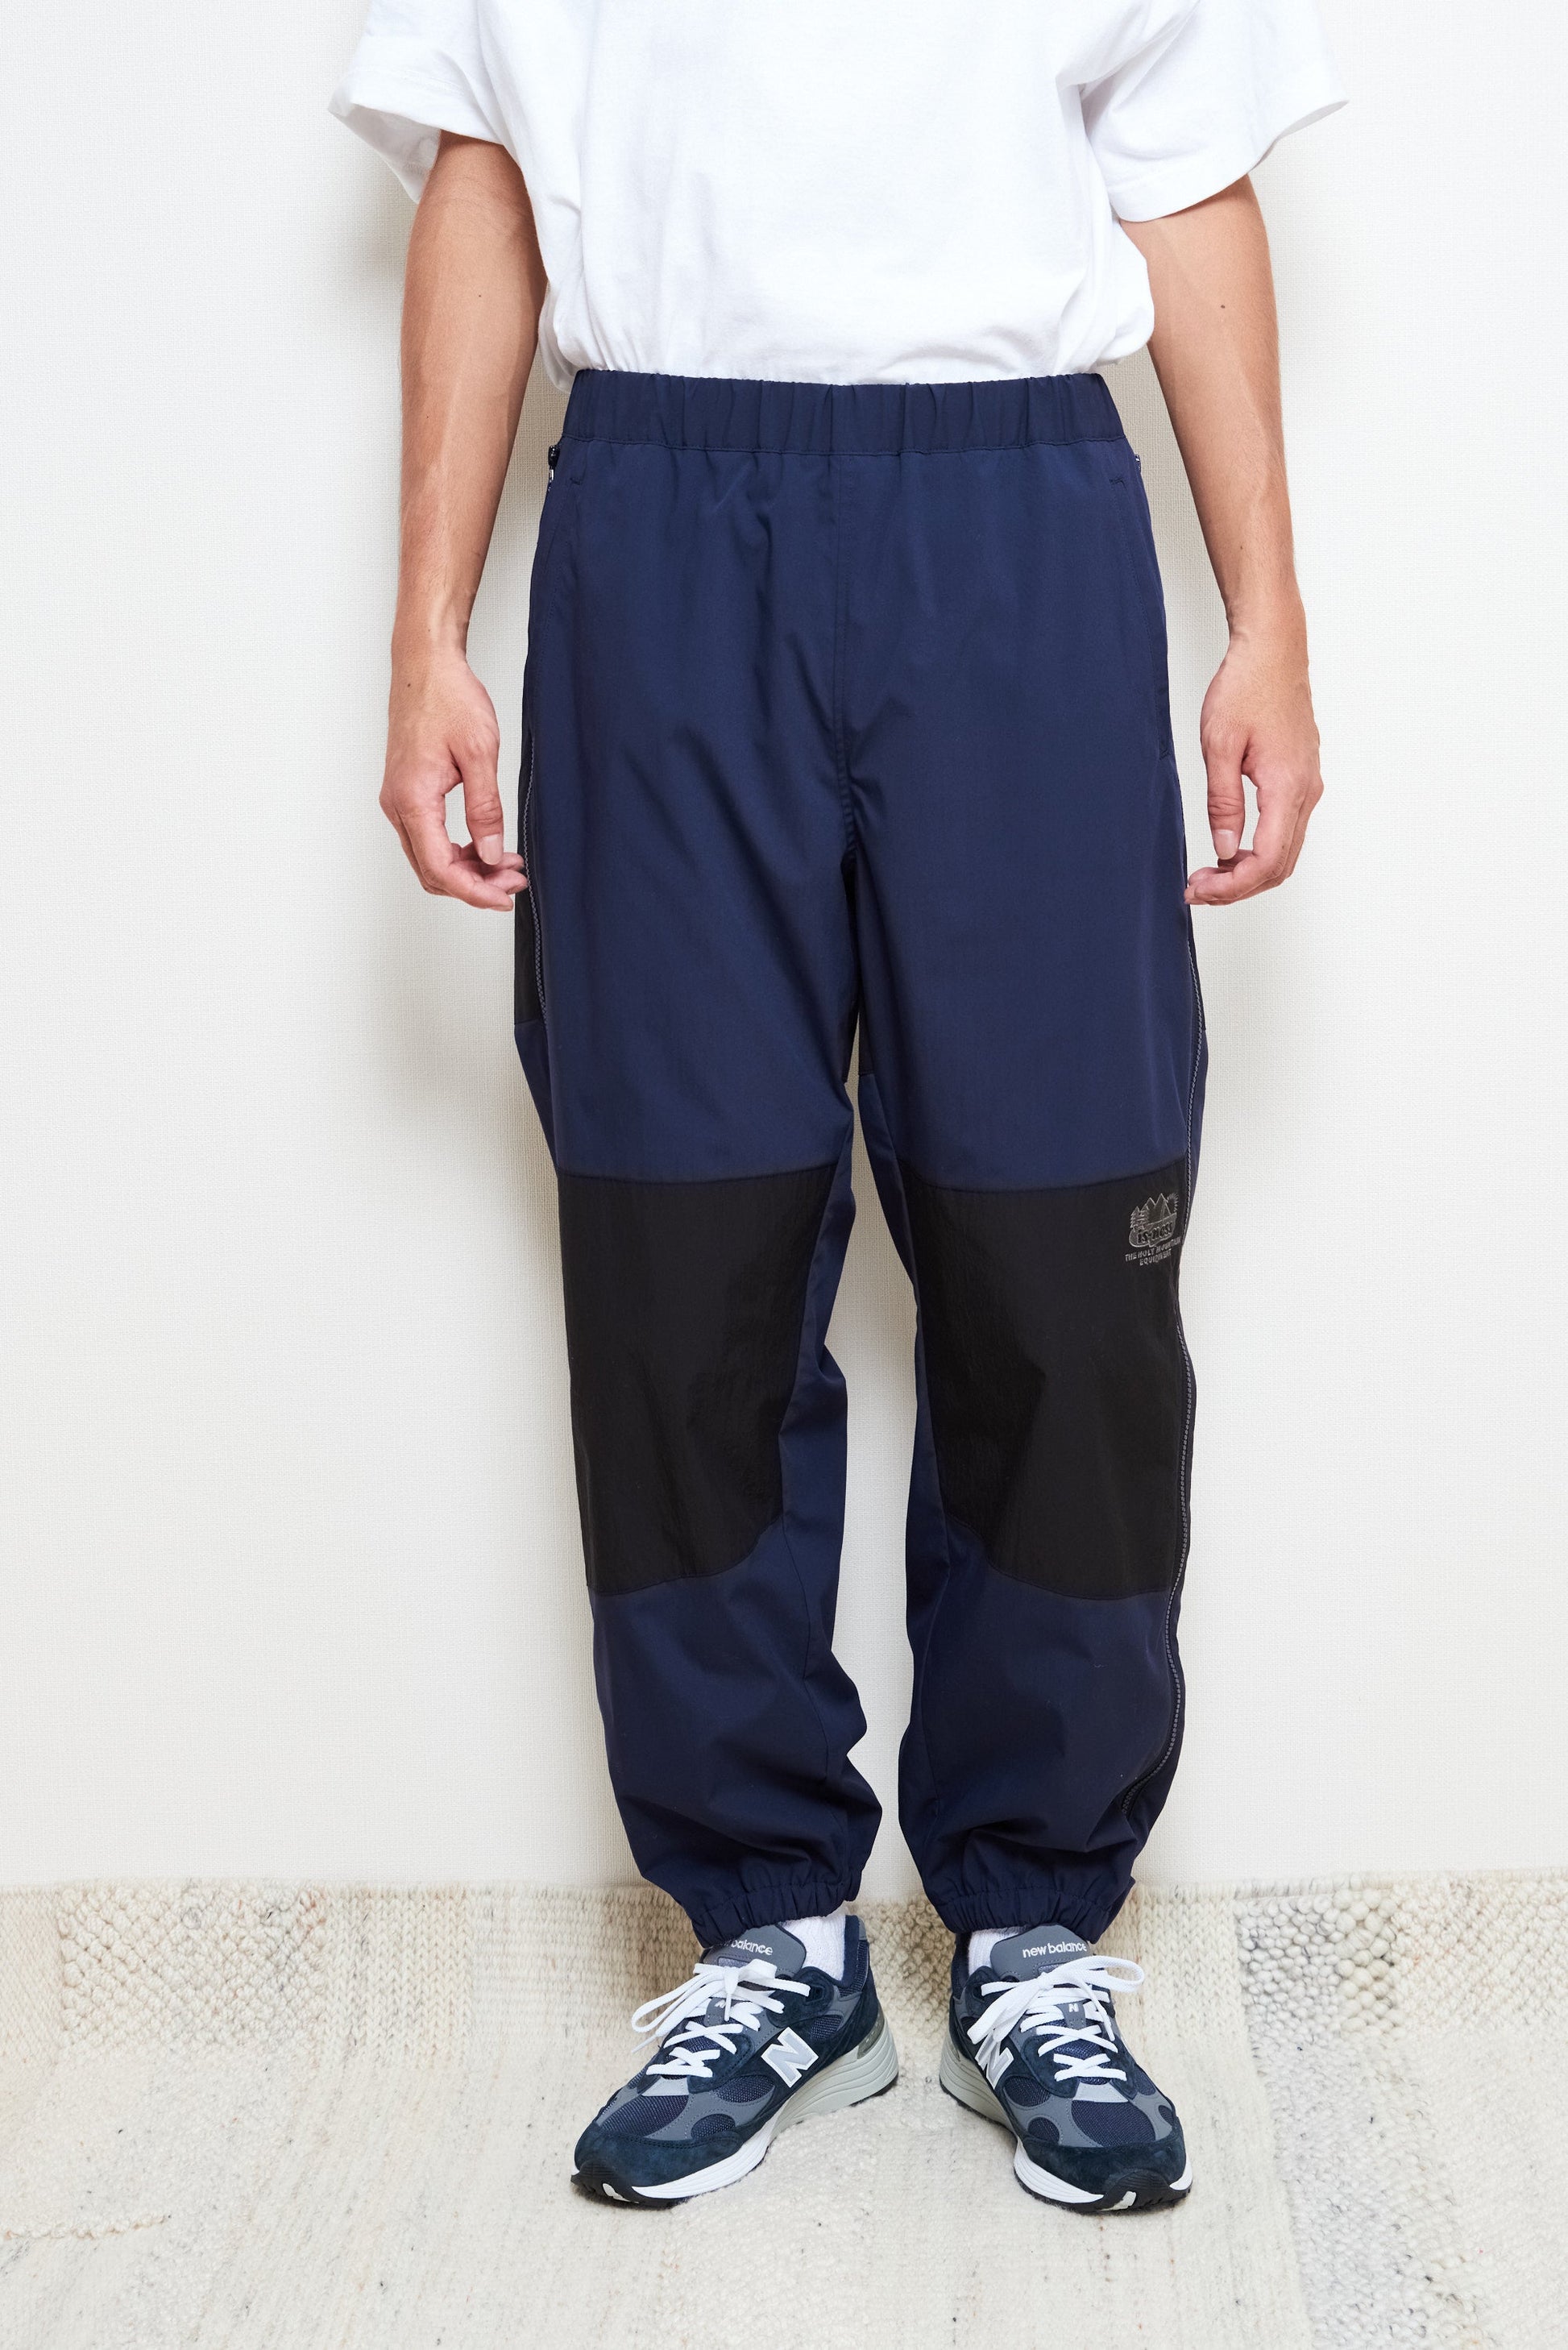 THE HOLY MOUNTAIN VENTILATION PANTS is-ness online shop 3